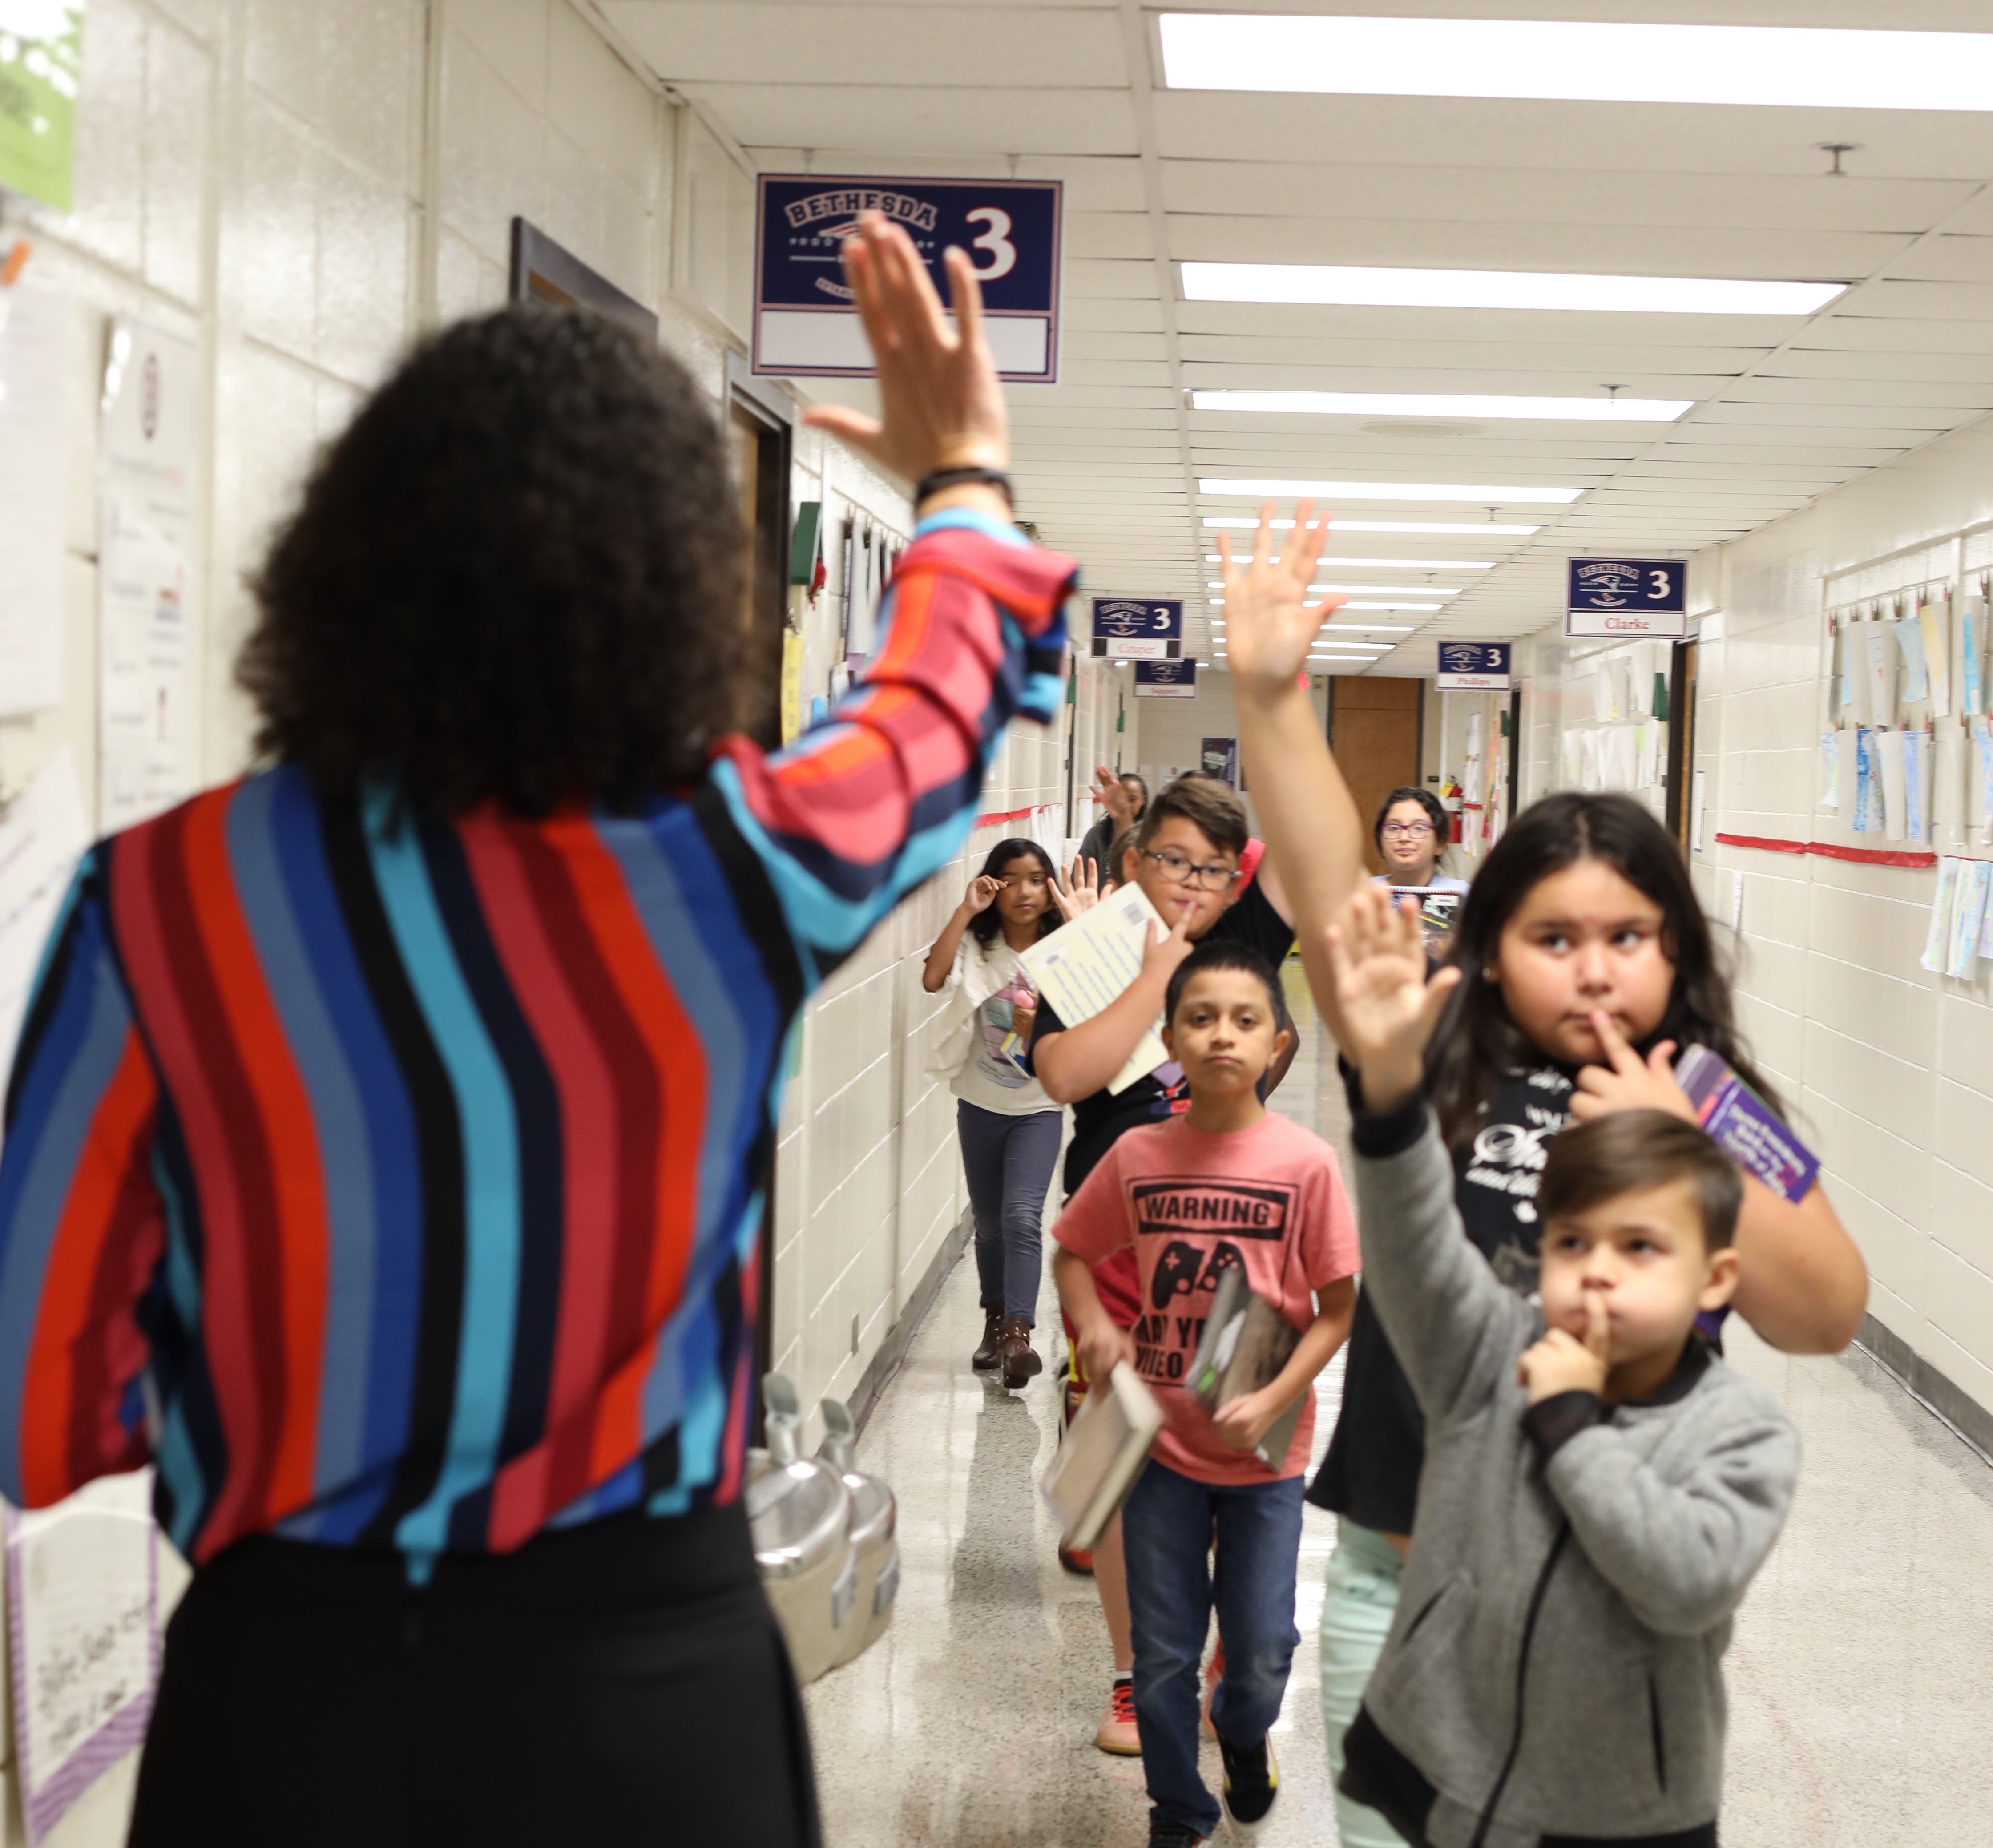 A school principal offers high-fives to students in the hallway.